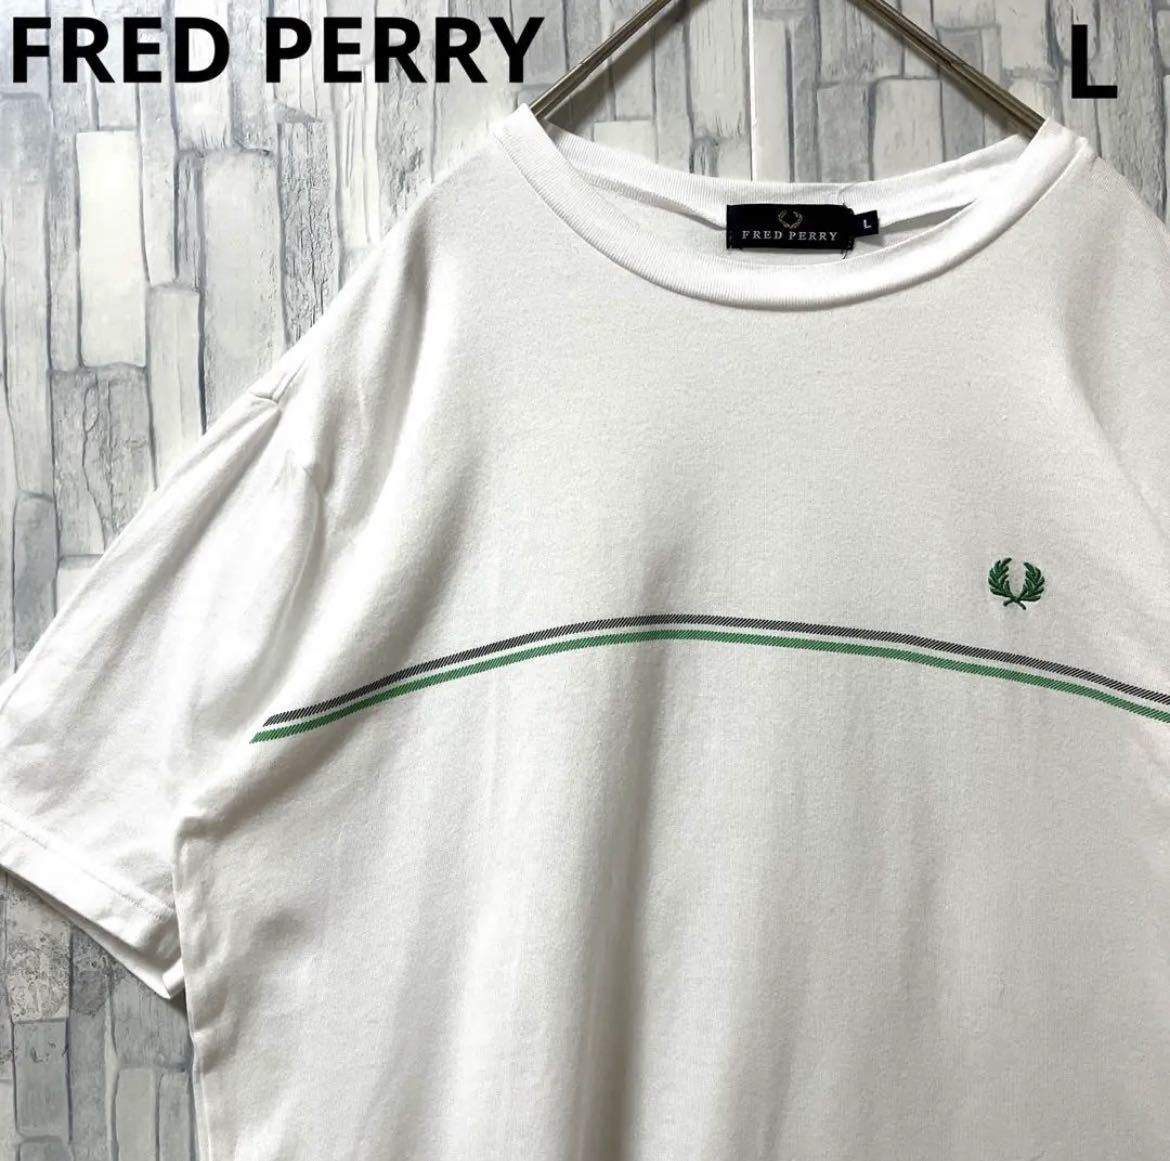 FRED PERRY Fred Perry short sleeves T-shirt size L white simple Logo one Point Logo embroidery Logo free shipping 